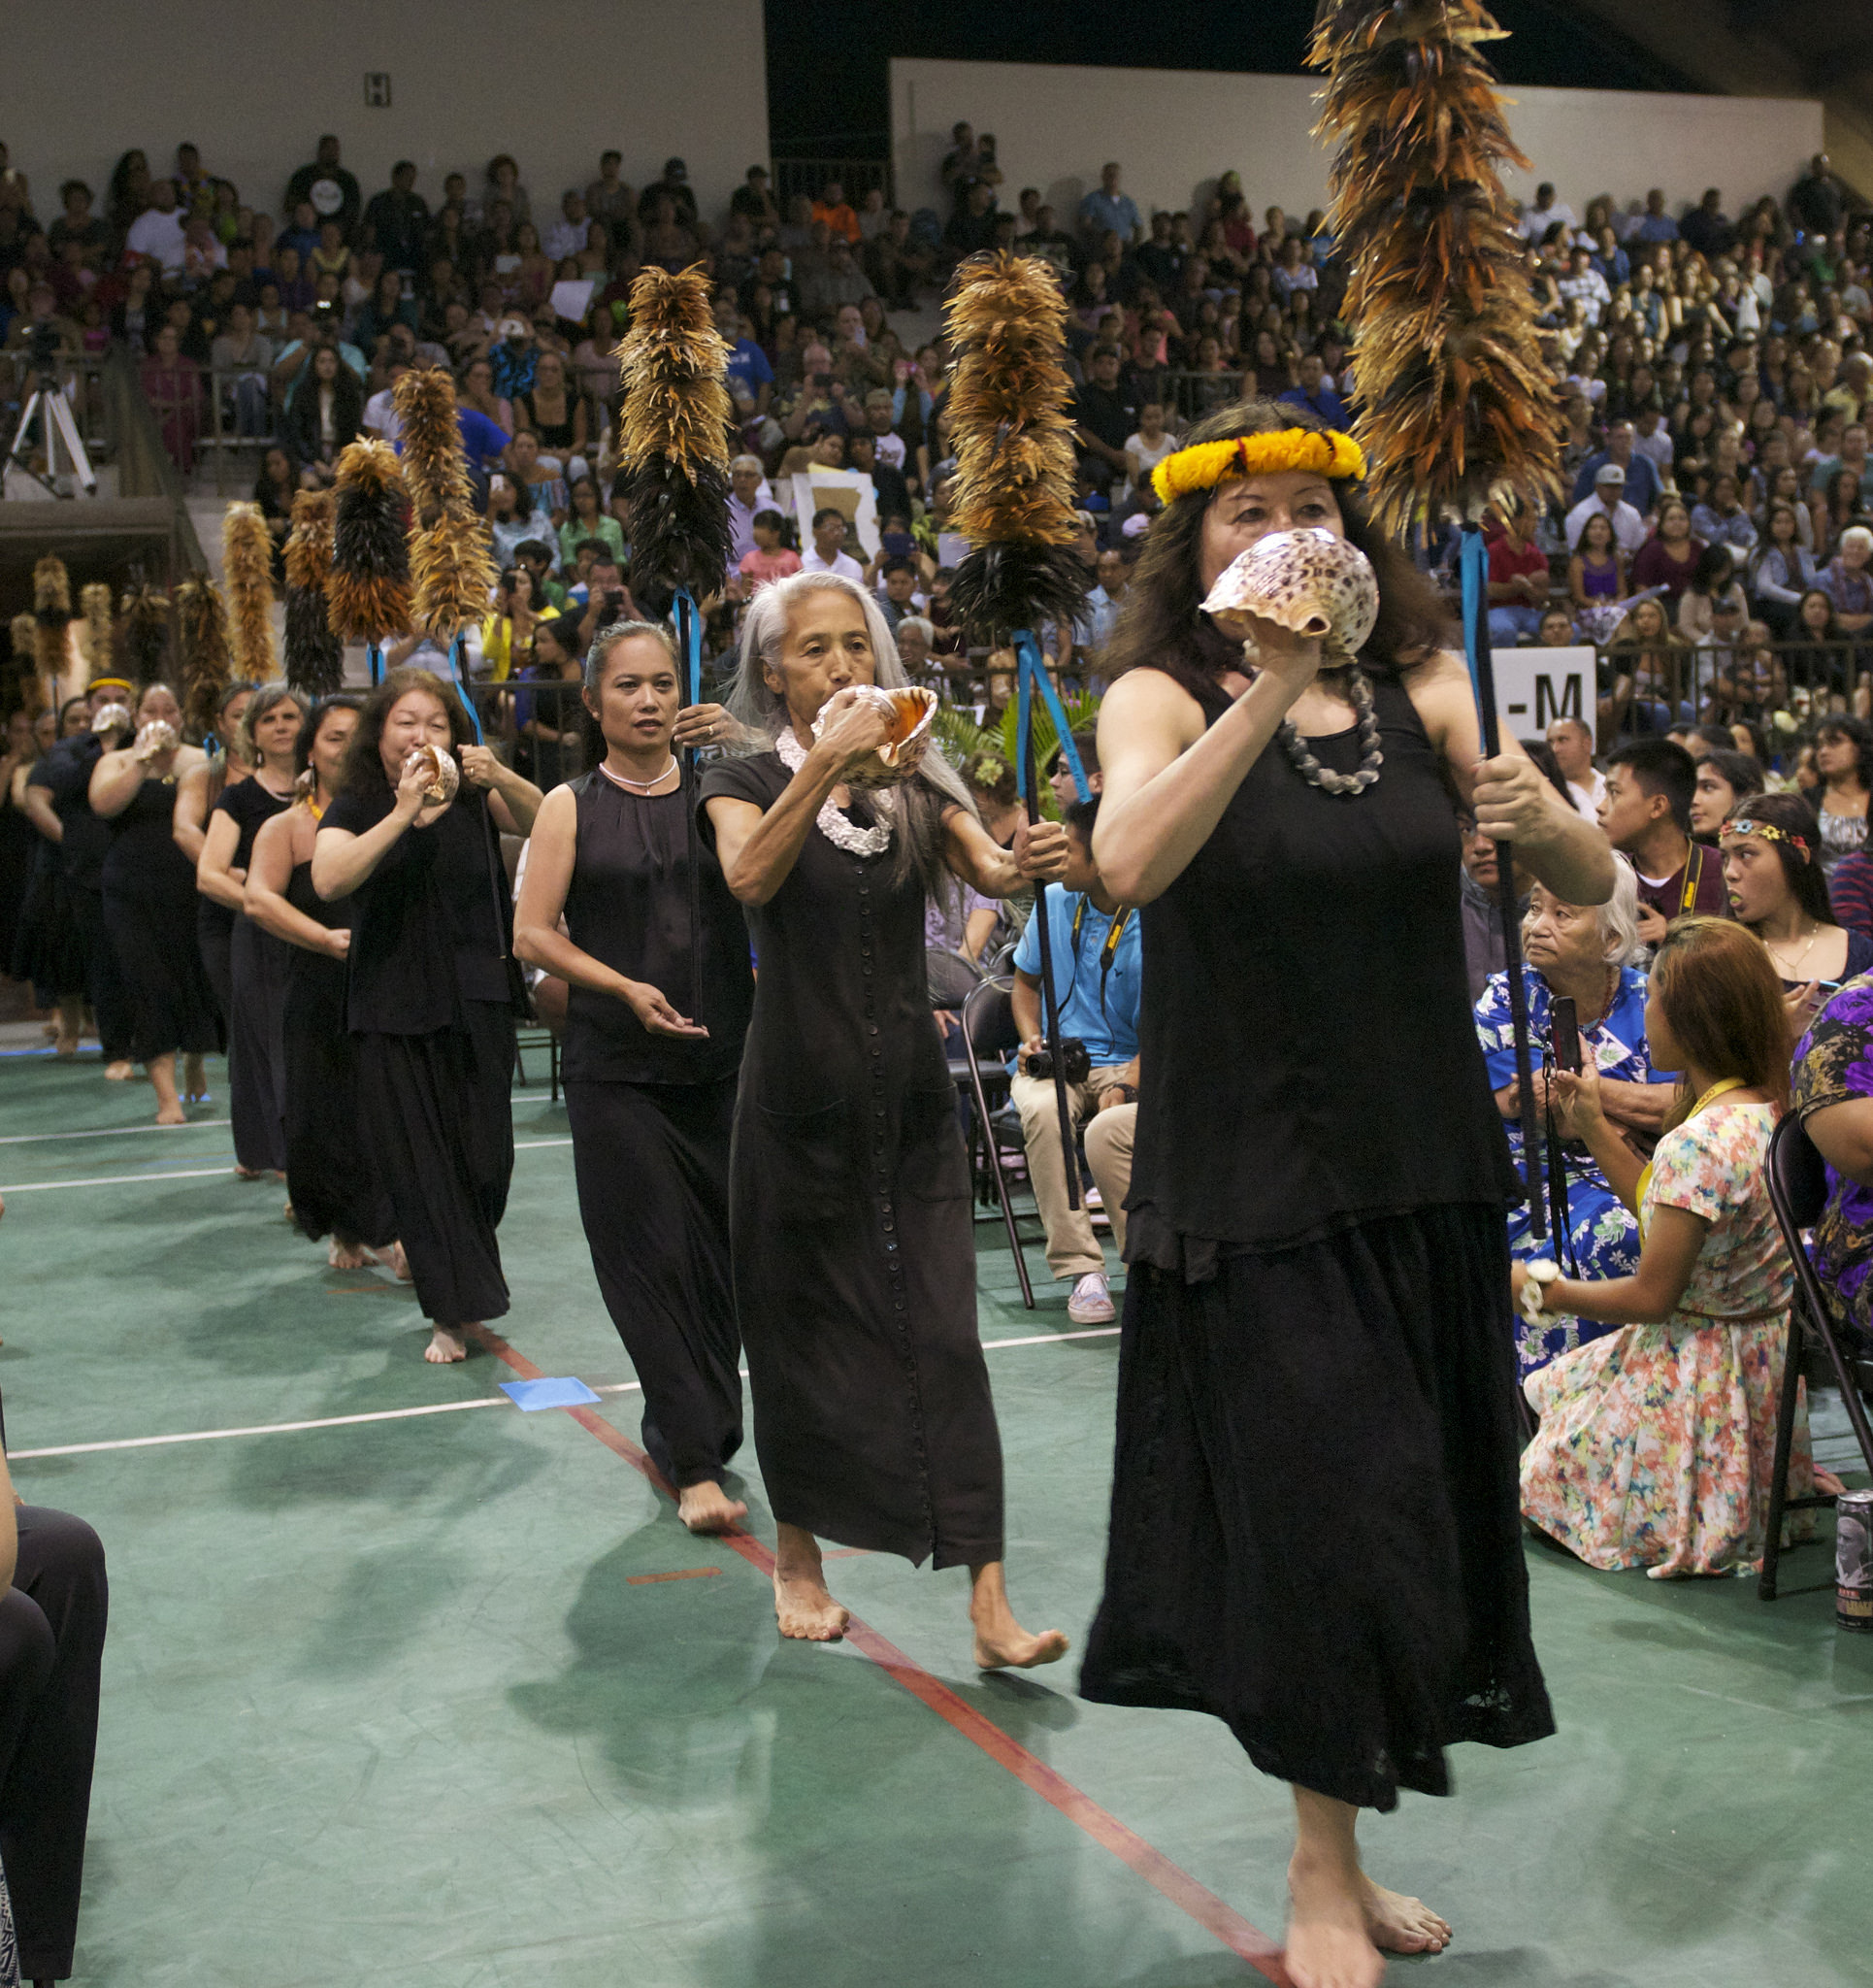 Trina Nahm-Mijo was in the first cohort of the Kūkū`enas, a mixed group of faculty, staff, and students started by Dr. Taupōouri Tangarō in 2009 to assist in Hawaiian protocols like Kīpaepae, pictured here at 2016 Hawai'i CC Graduation.